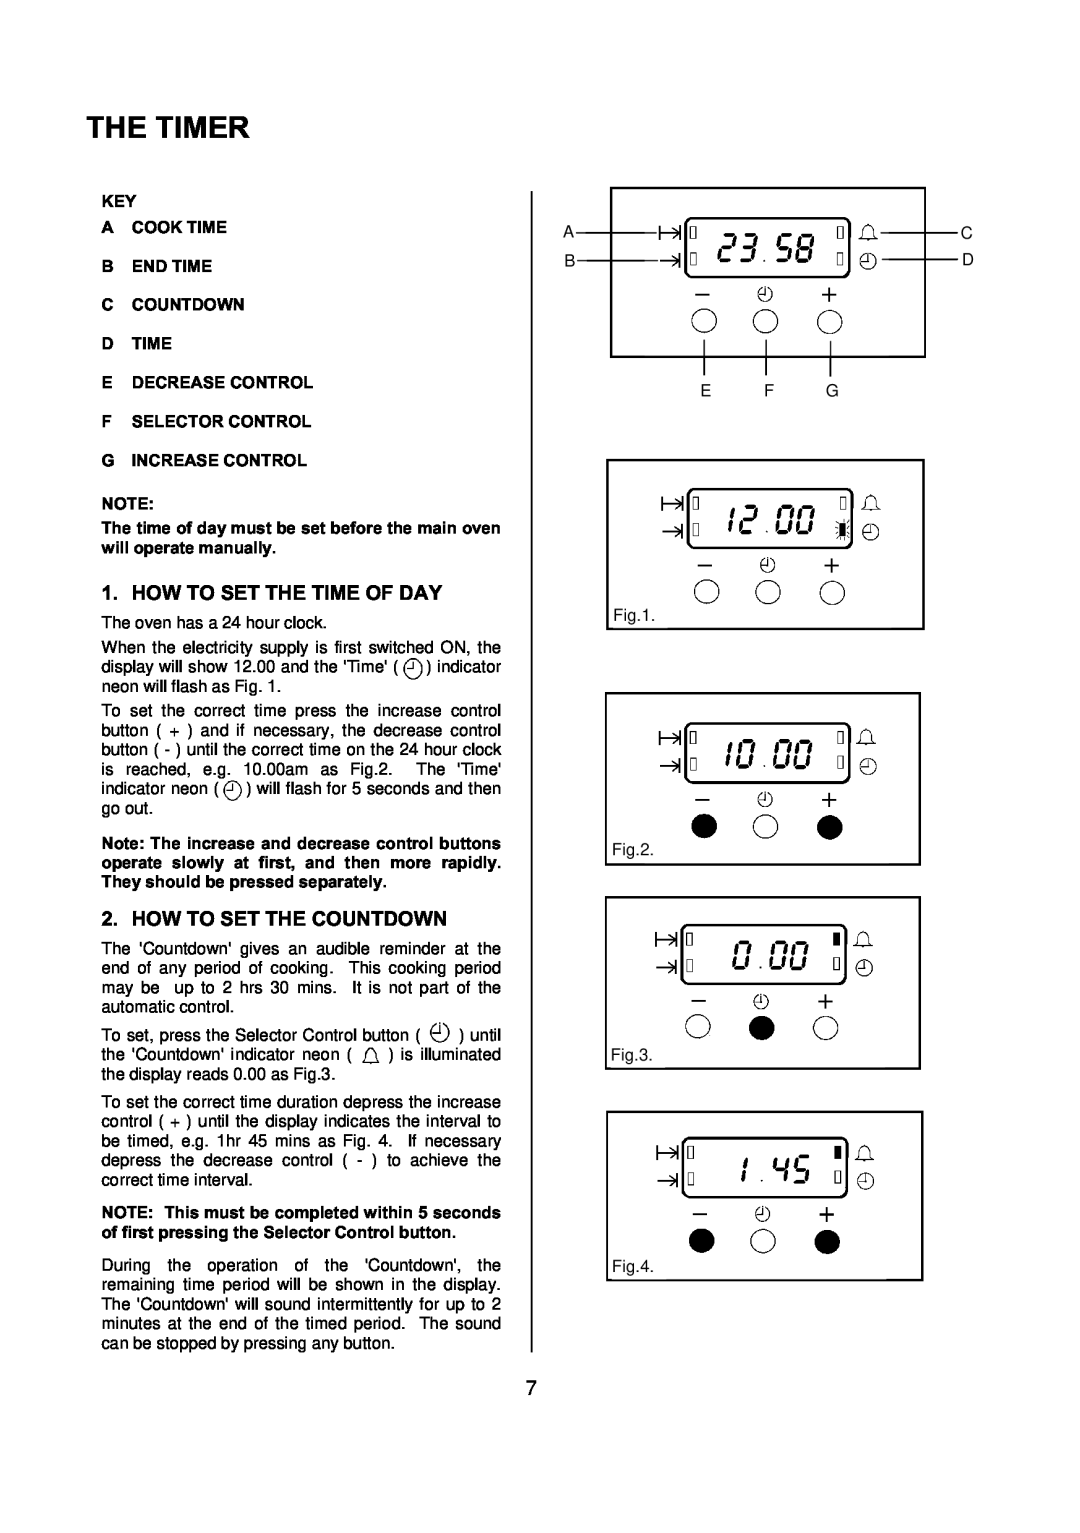 Electrolux D77000 user manual The Timer, How To Set The Time Of Day, How To Set The Countdown 